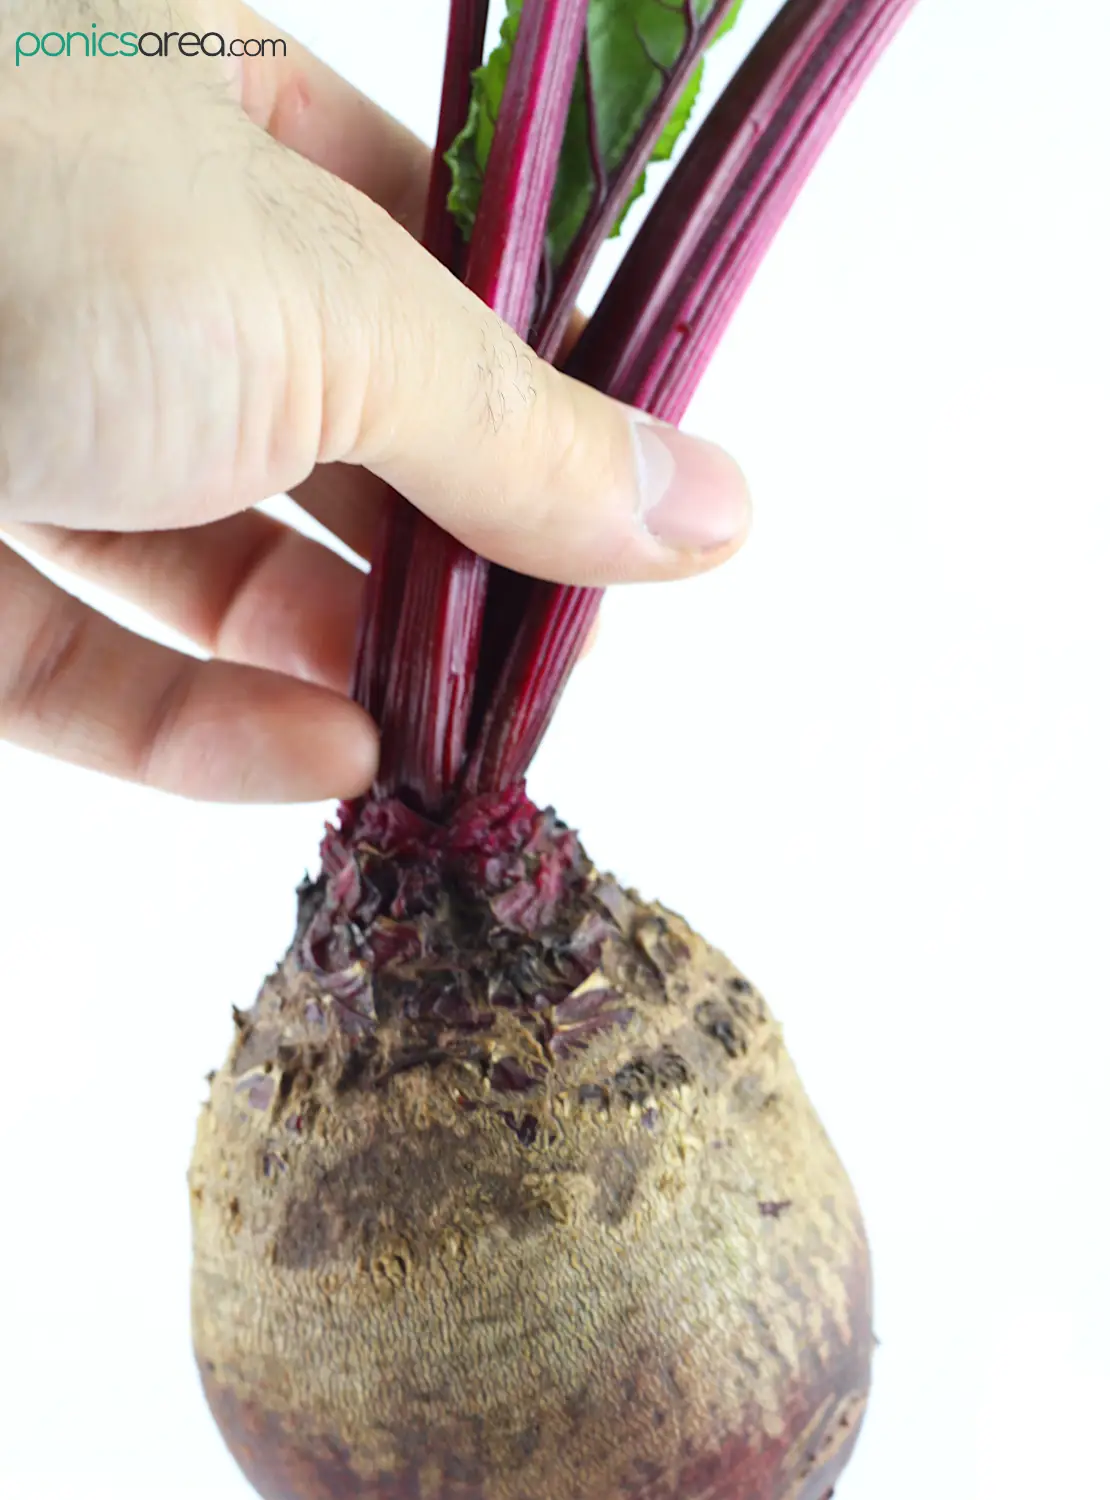 hydroponic conditions for growing beetroots